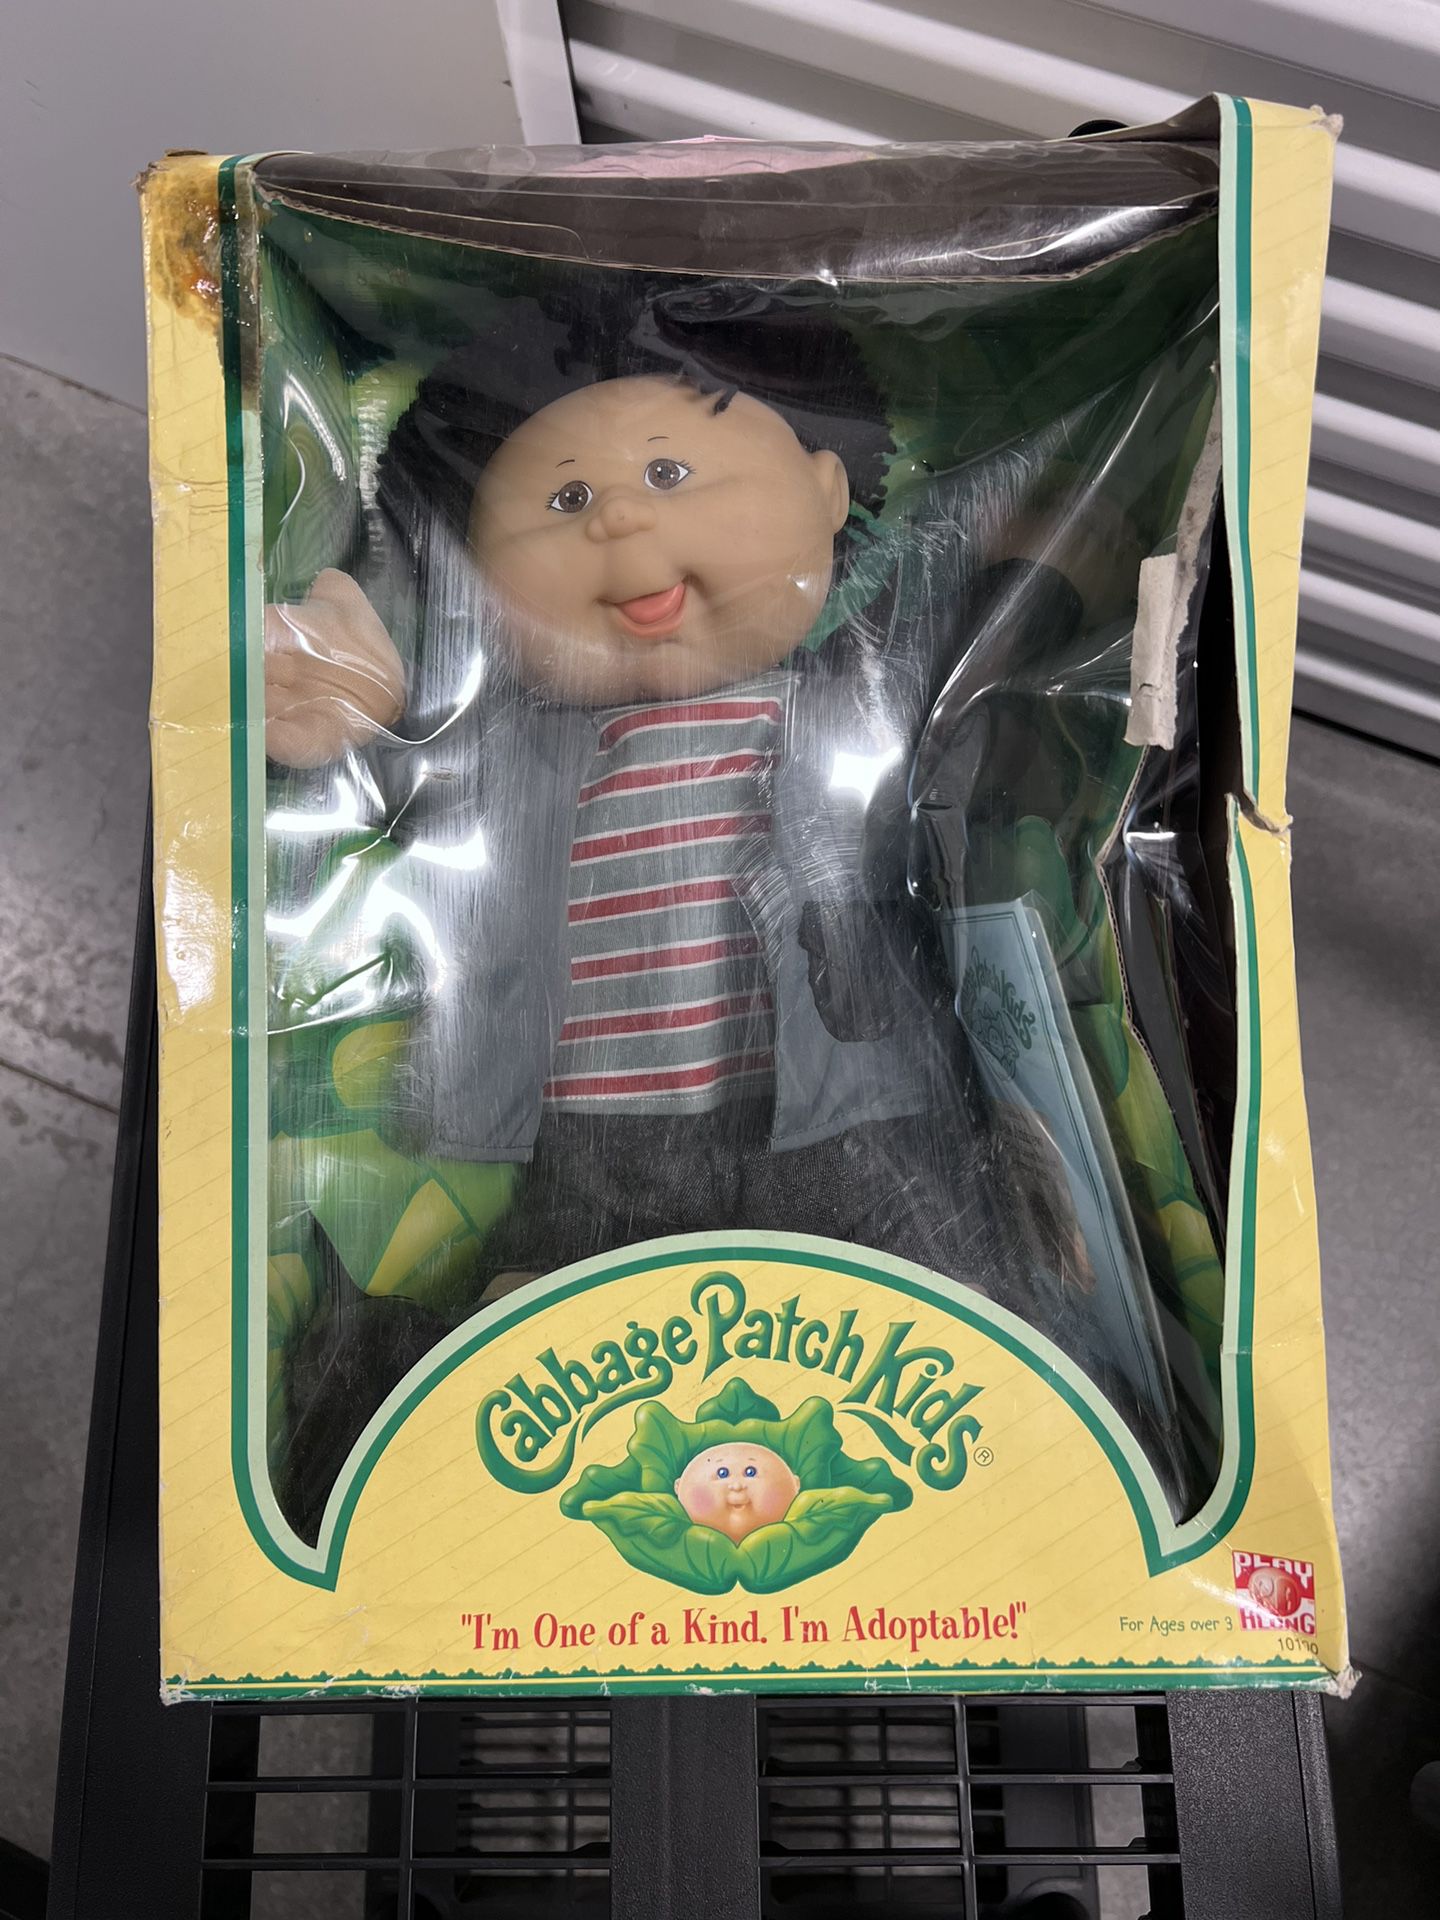 Vintage Cabbage patch Doll